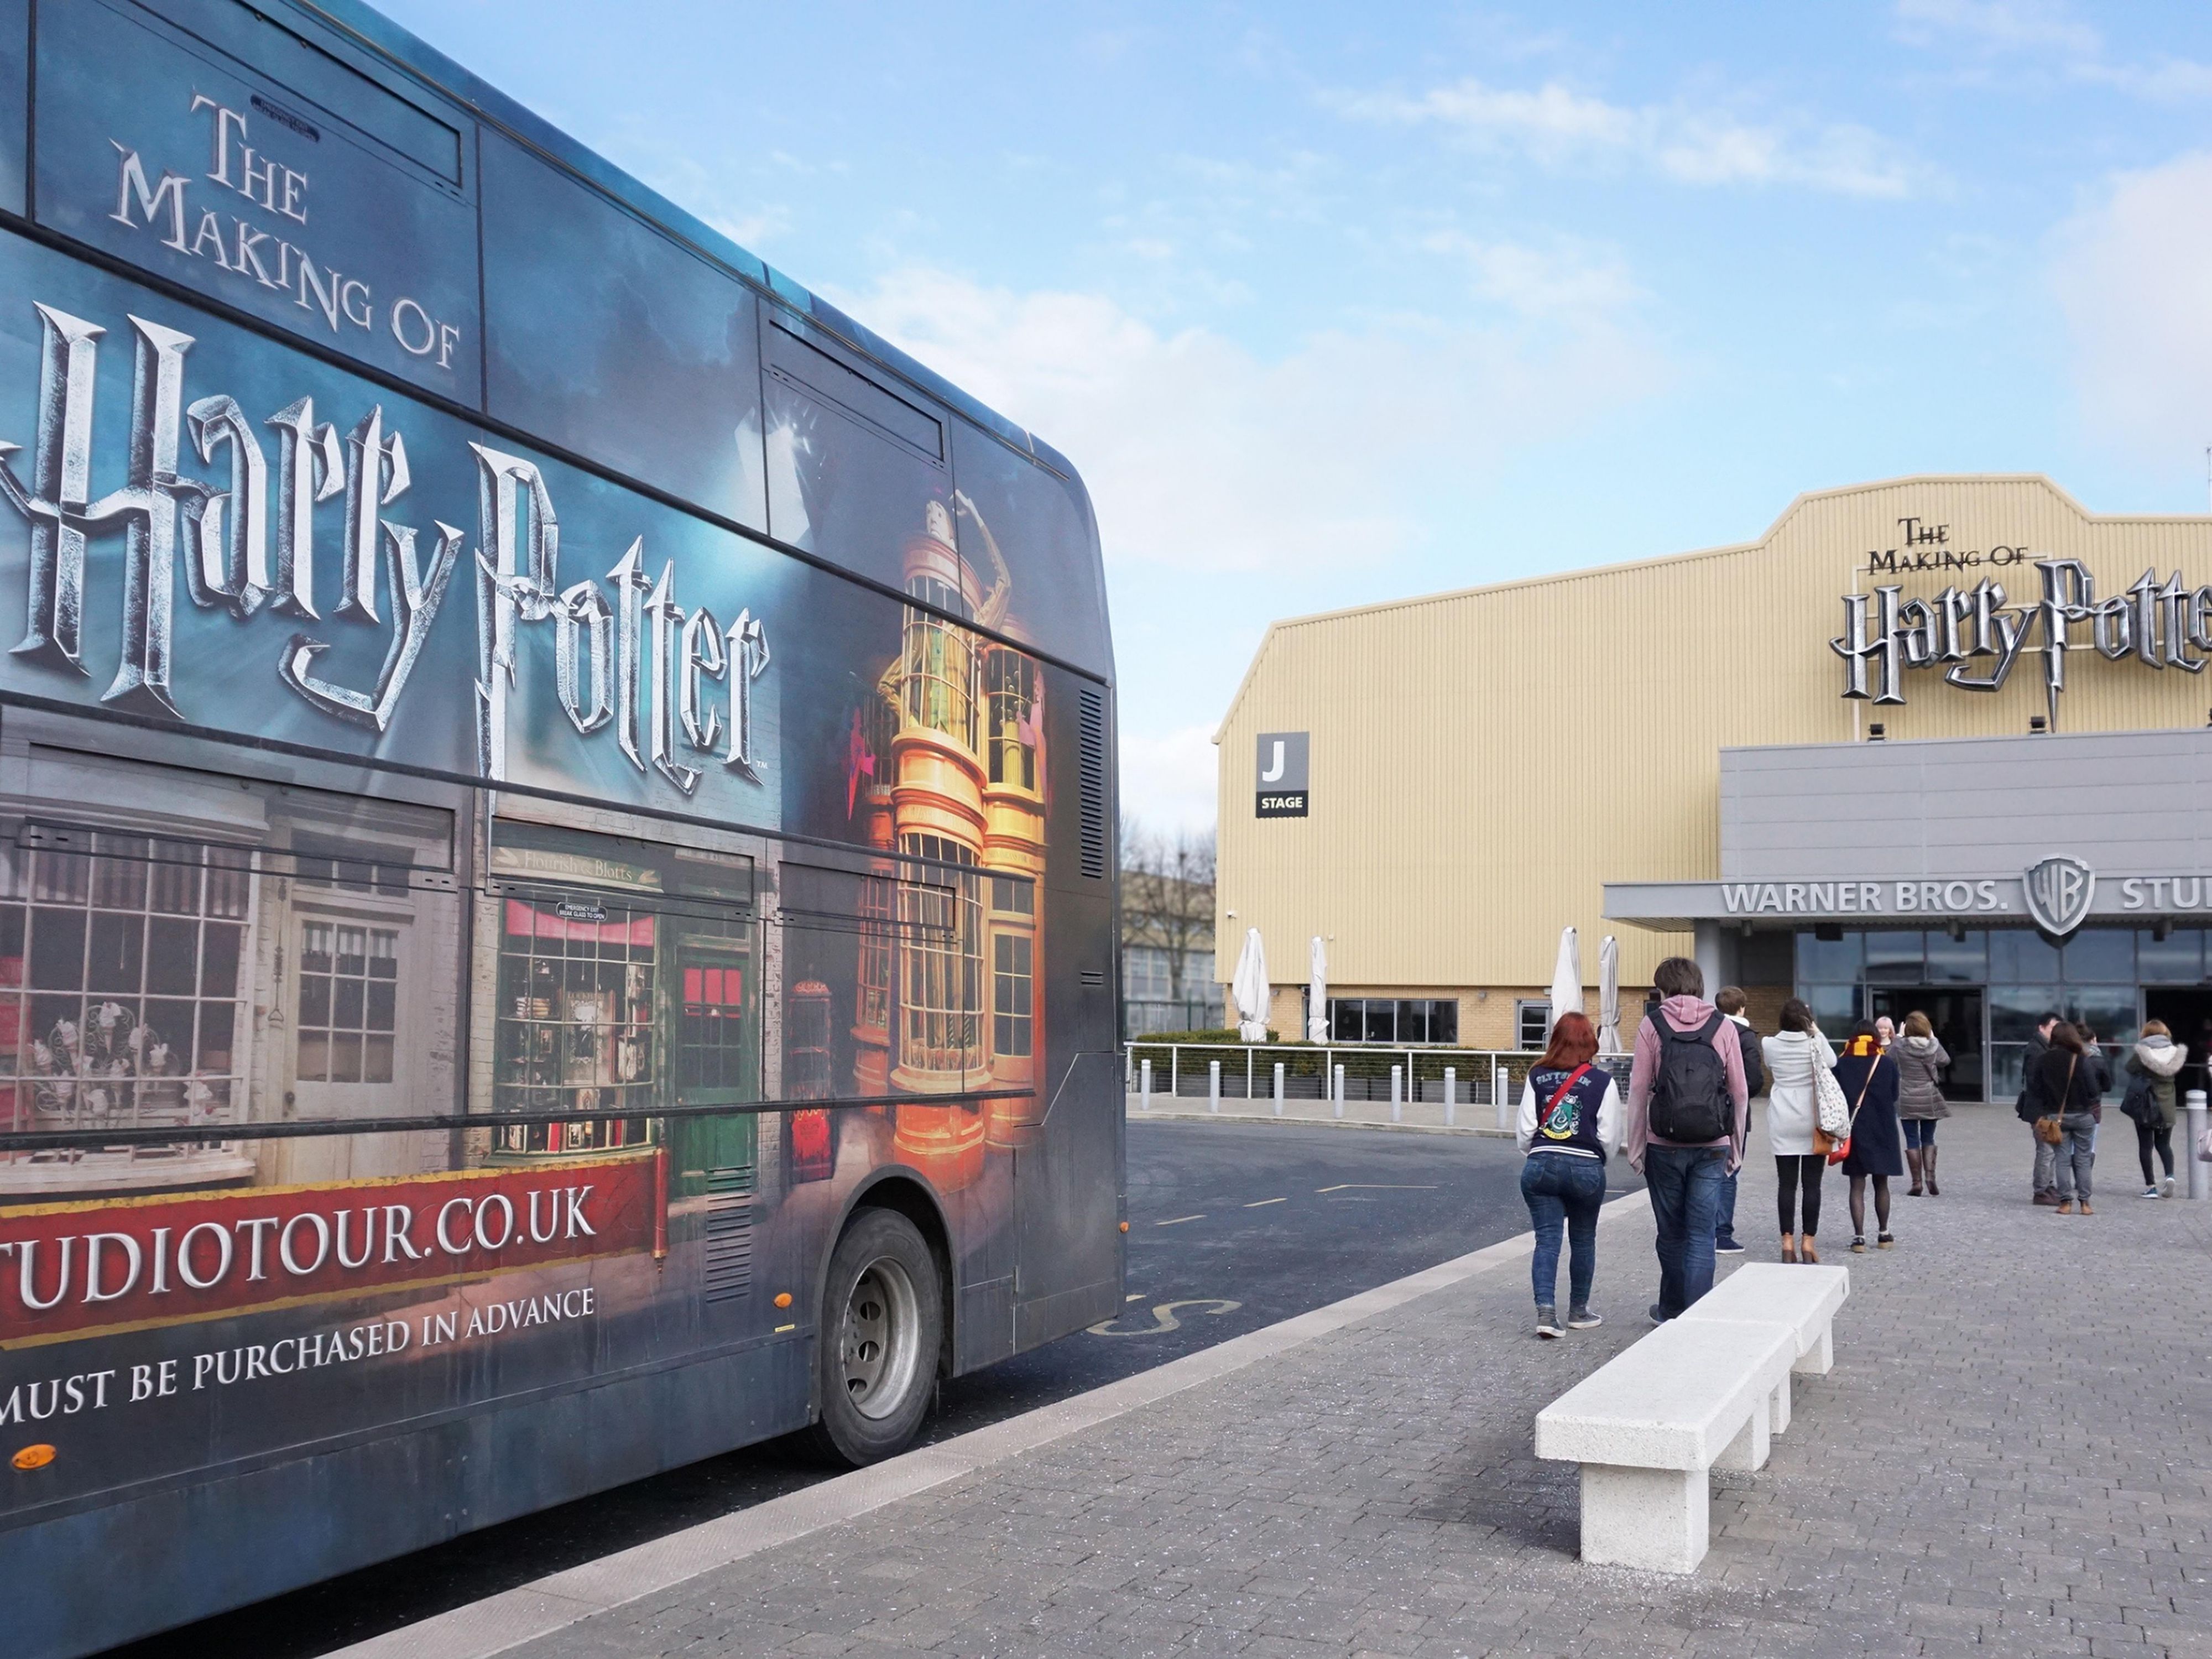 For all budding wizards and witches, a visit to Warner Brother Studios – The Making of Harry Potter is a must see!  Located less than 25 minutes drive from the hotel.